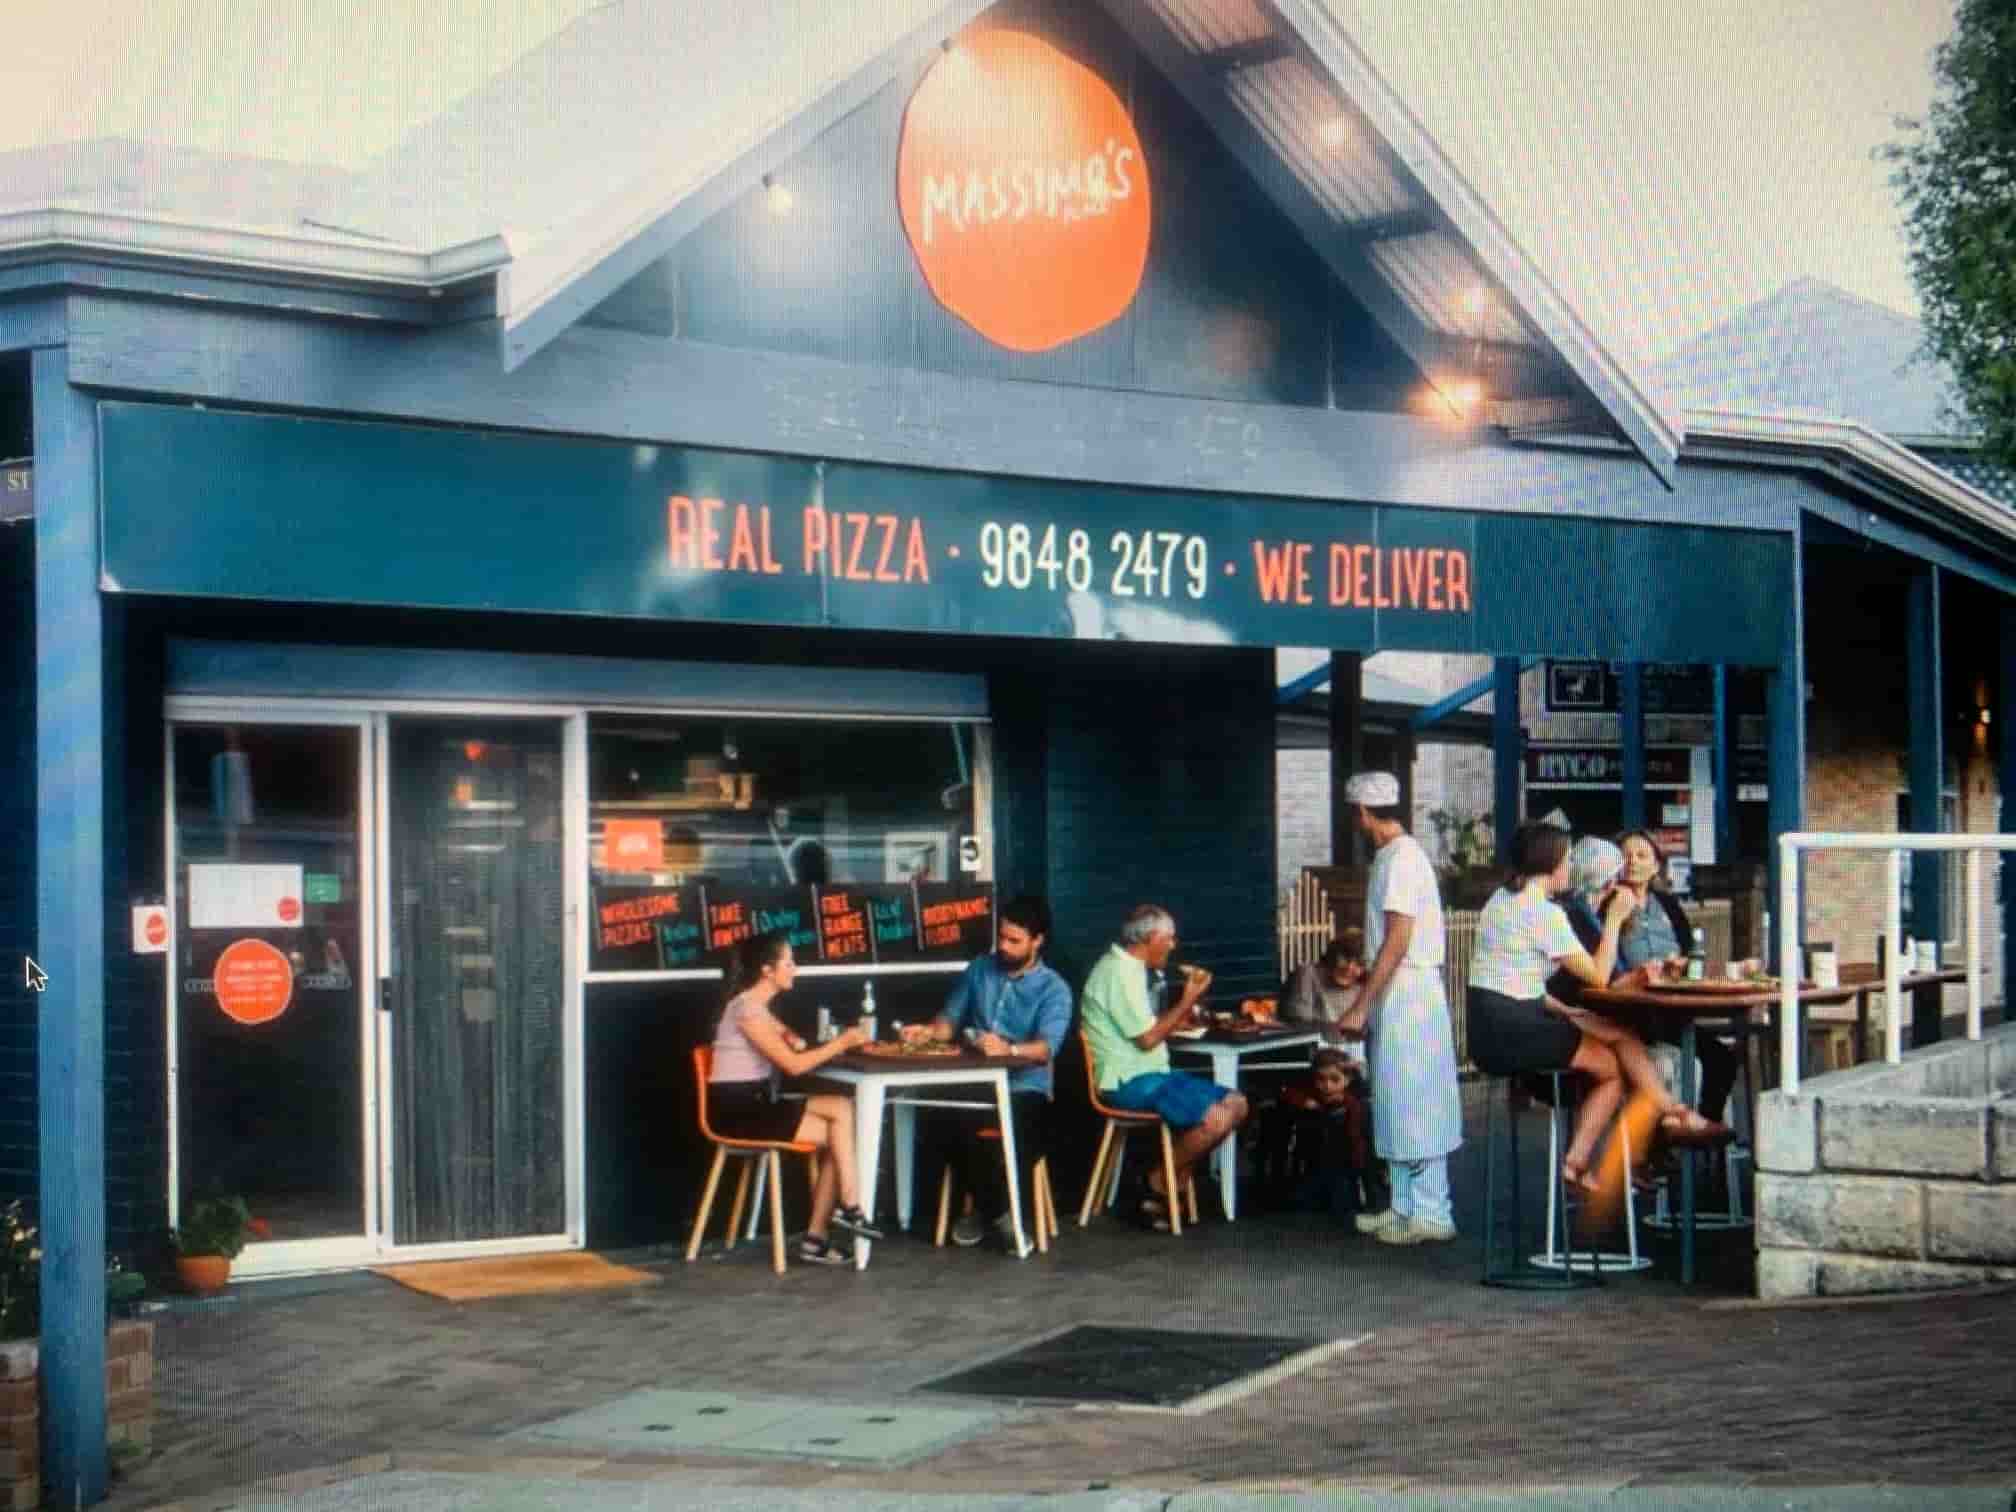 People sitting outside the pizza shop in Denmark